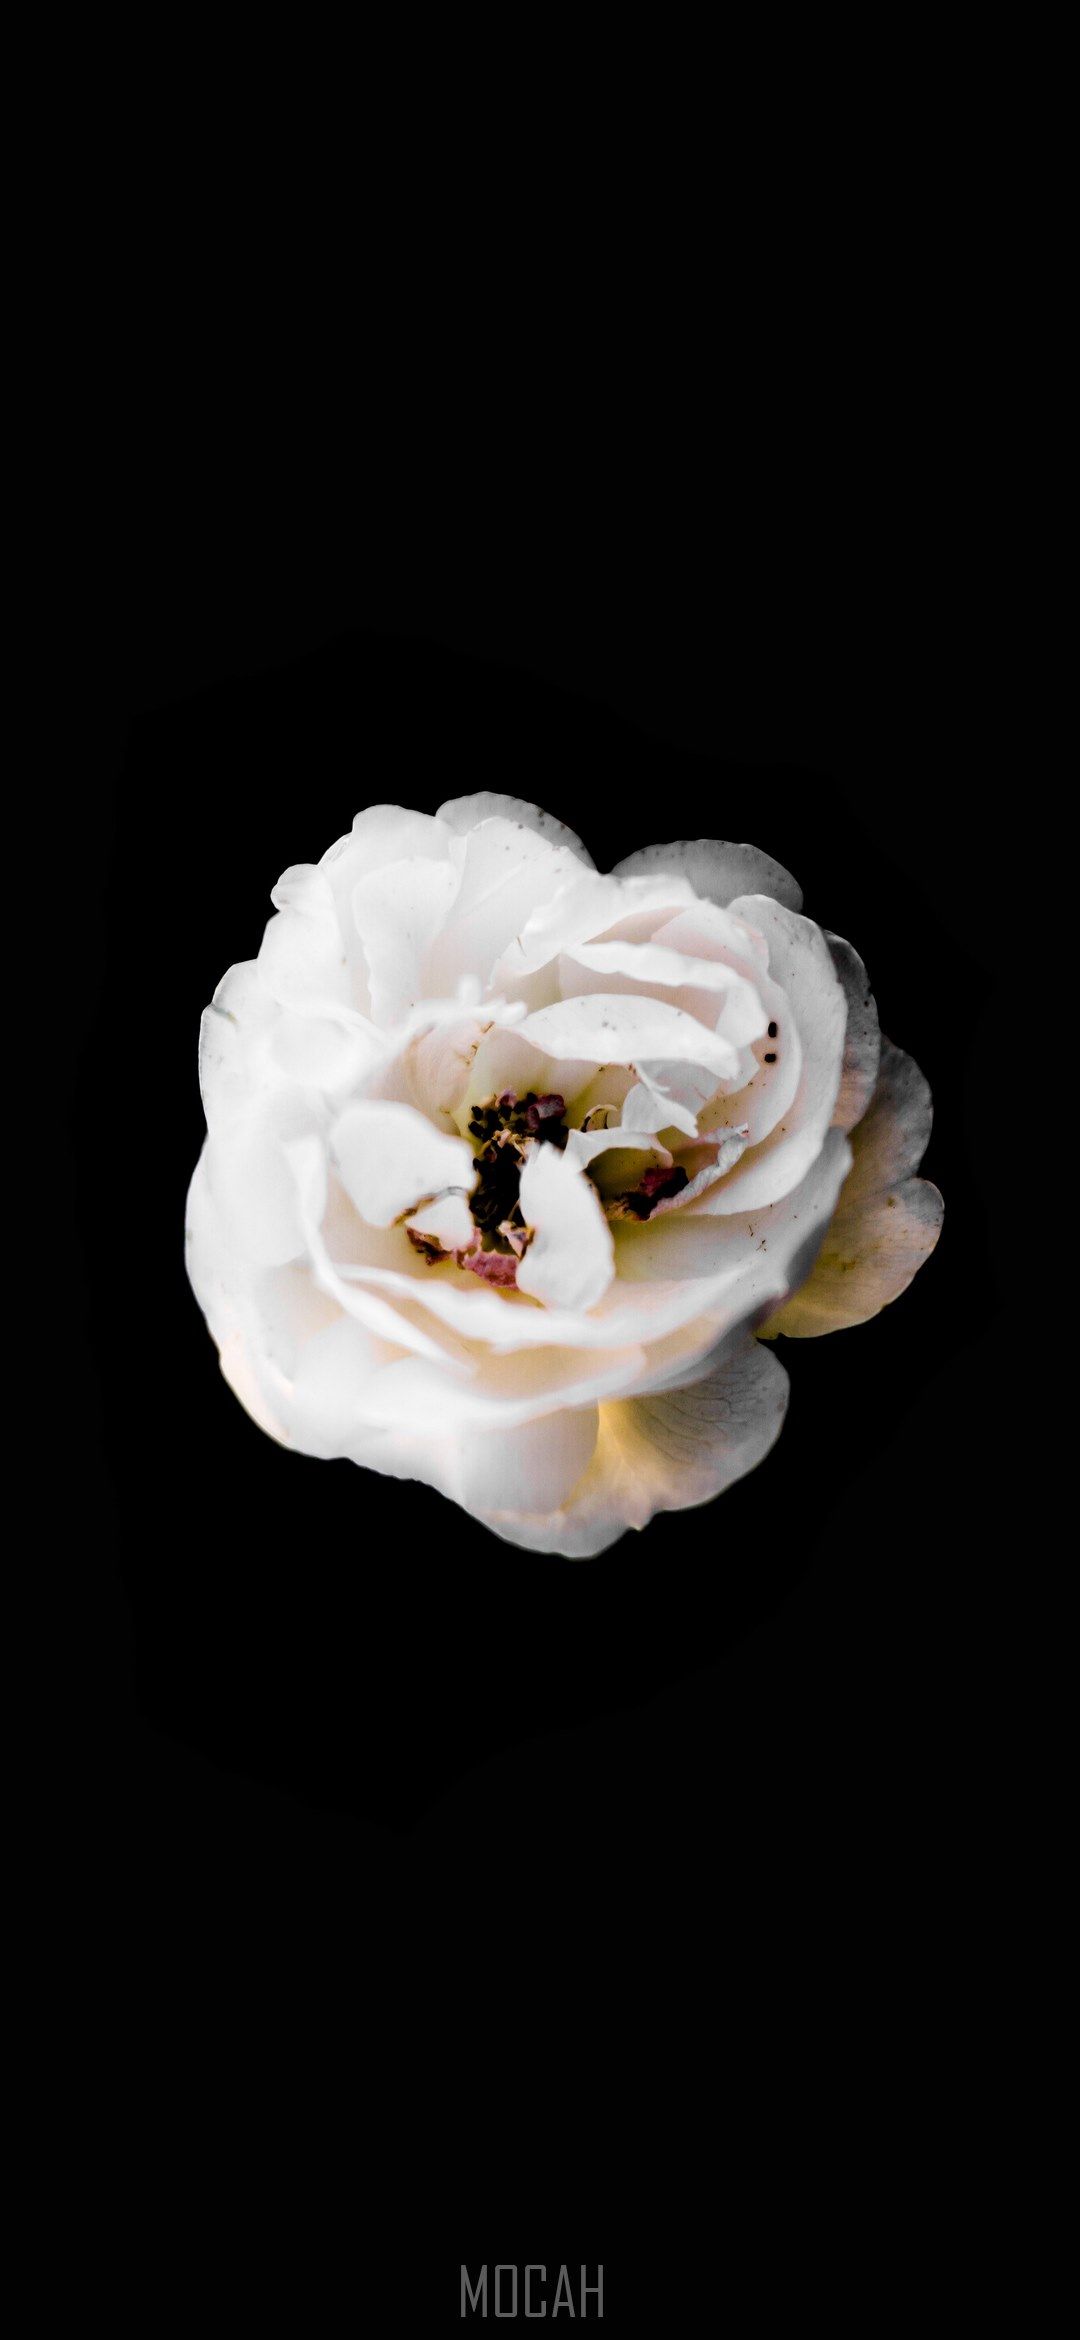 an above view of the petals on a white flower with a dark background, _white rose, TCL 10 Plus wallpaper download, 1080x2340 Gallery HD Wallpaper